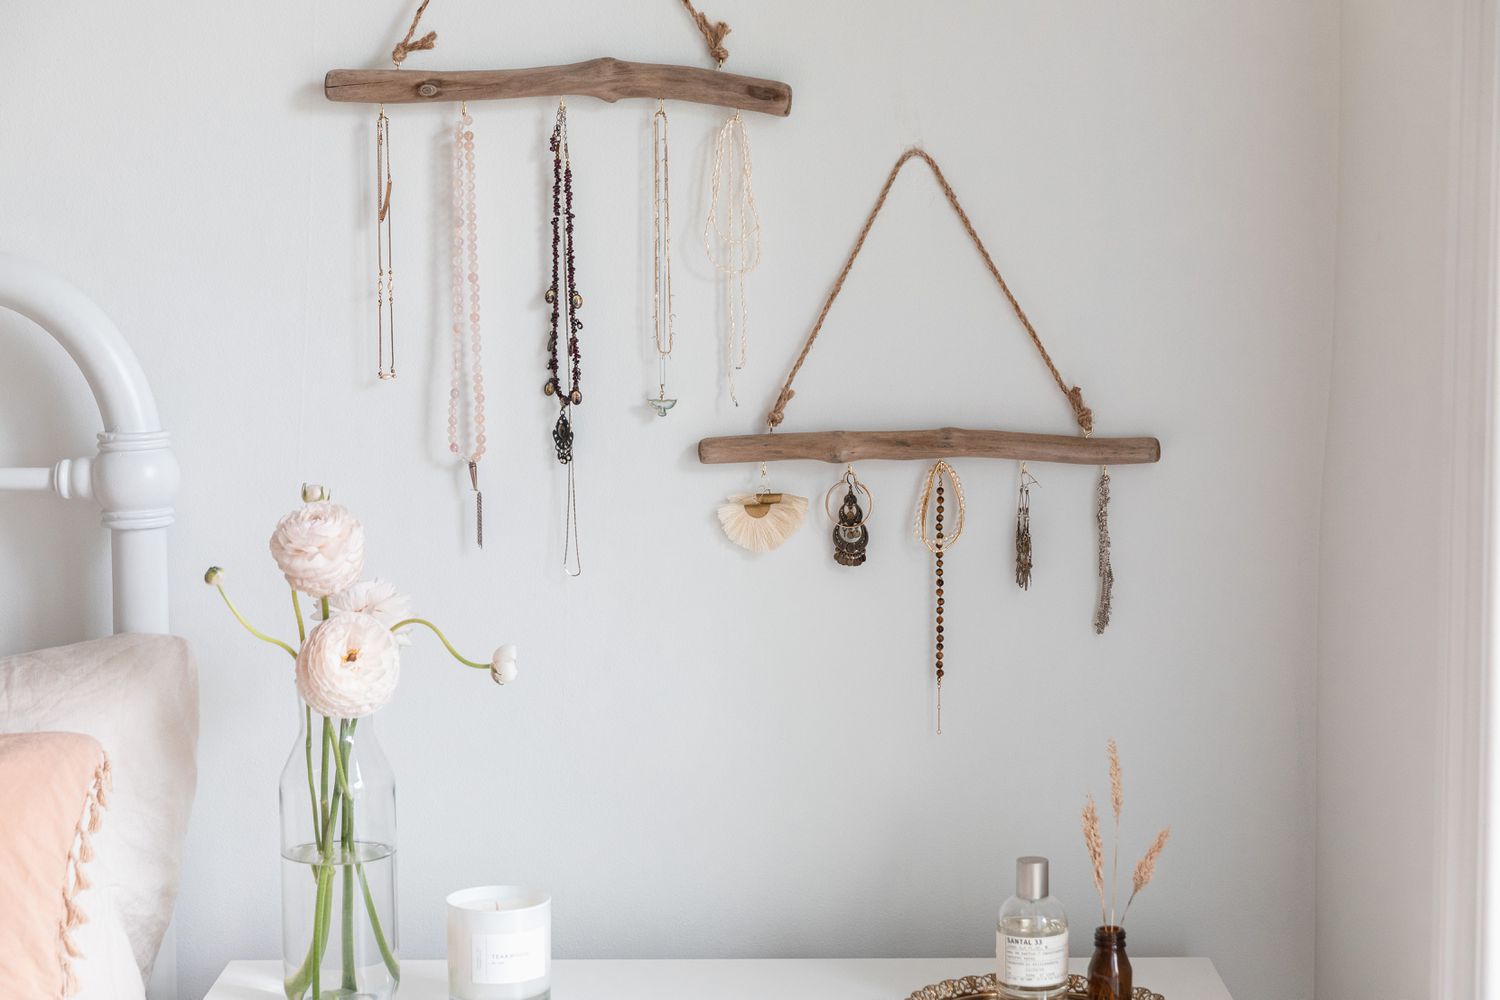 Using branches to display jewelry pieces